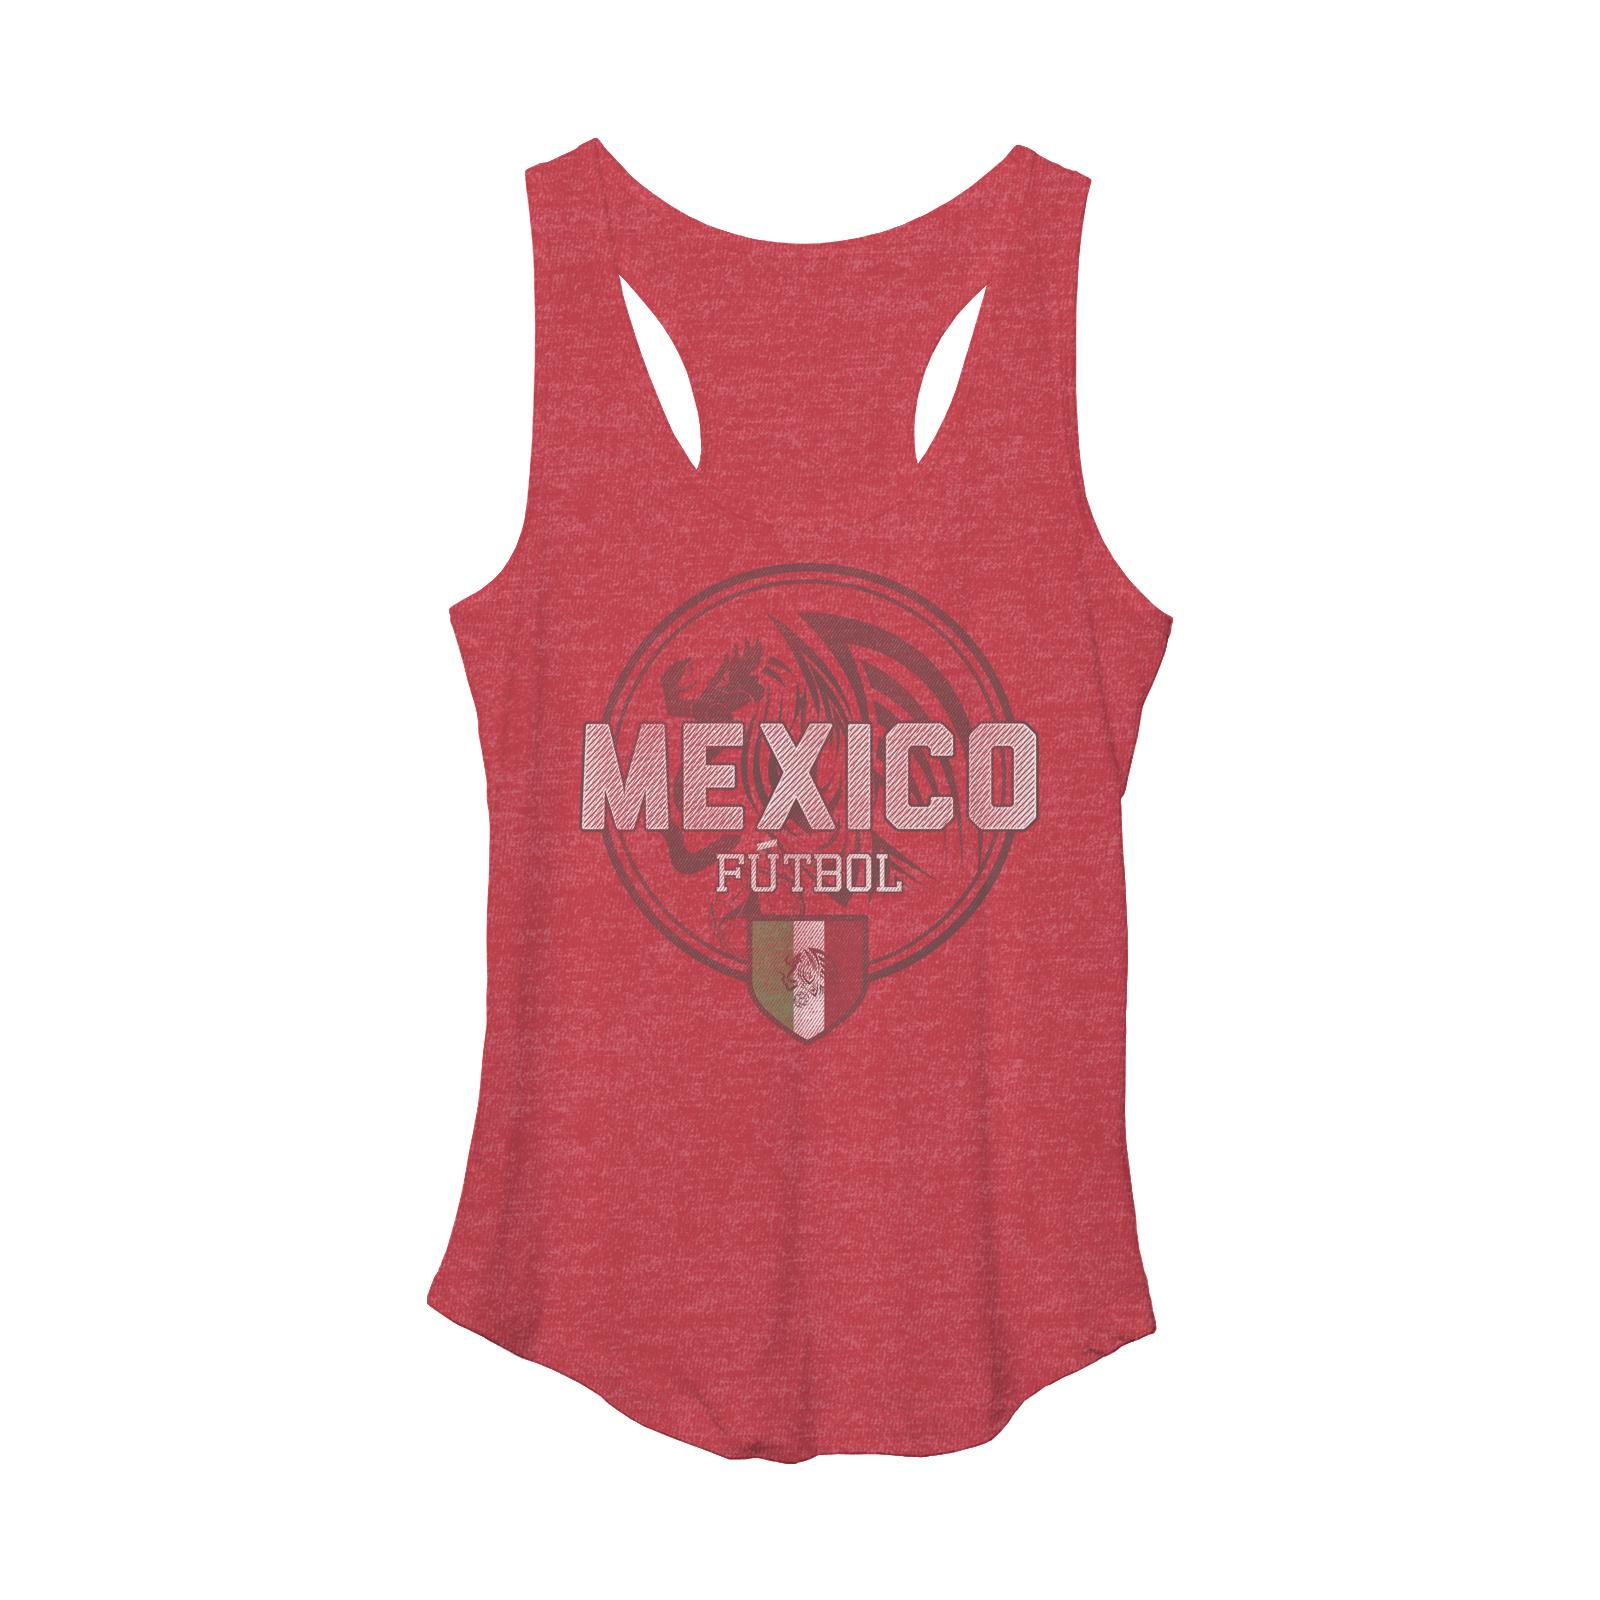 Women's Graphic Tank Top - Mexico National Football Team